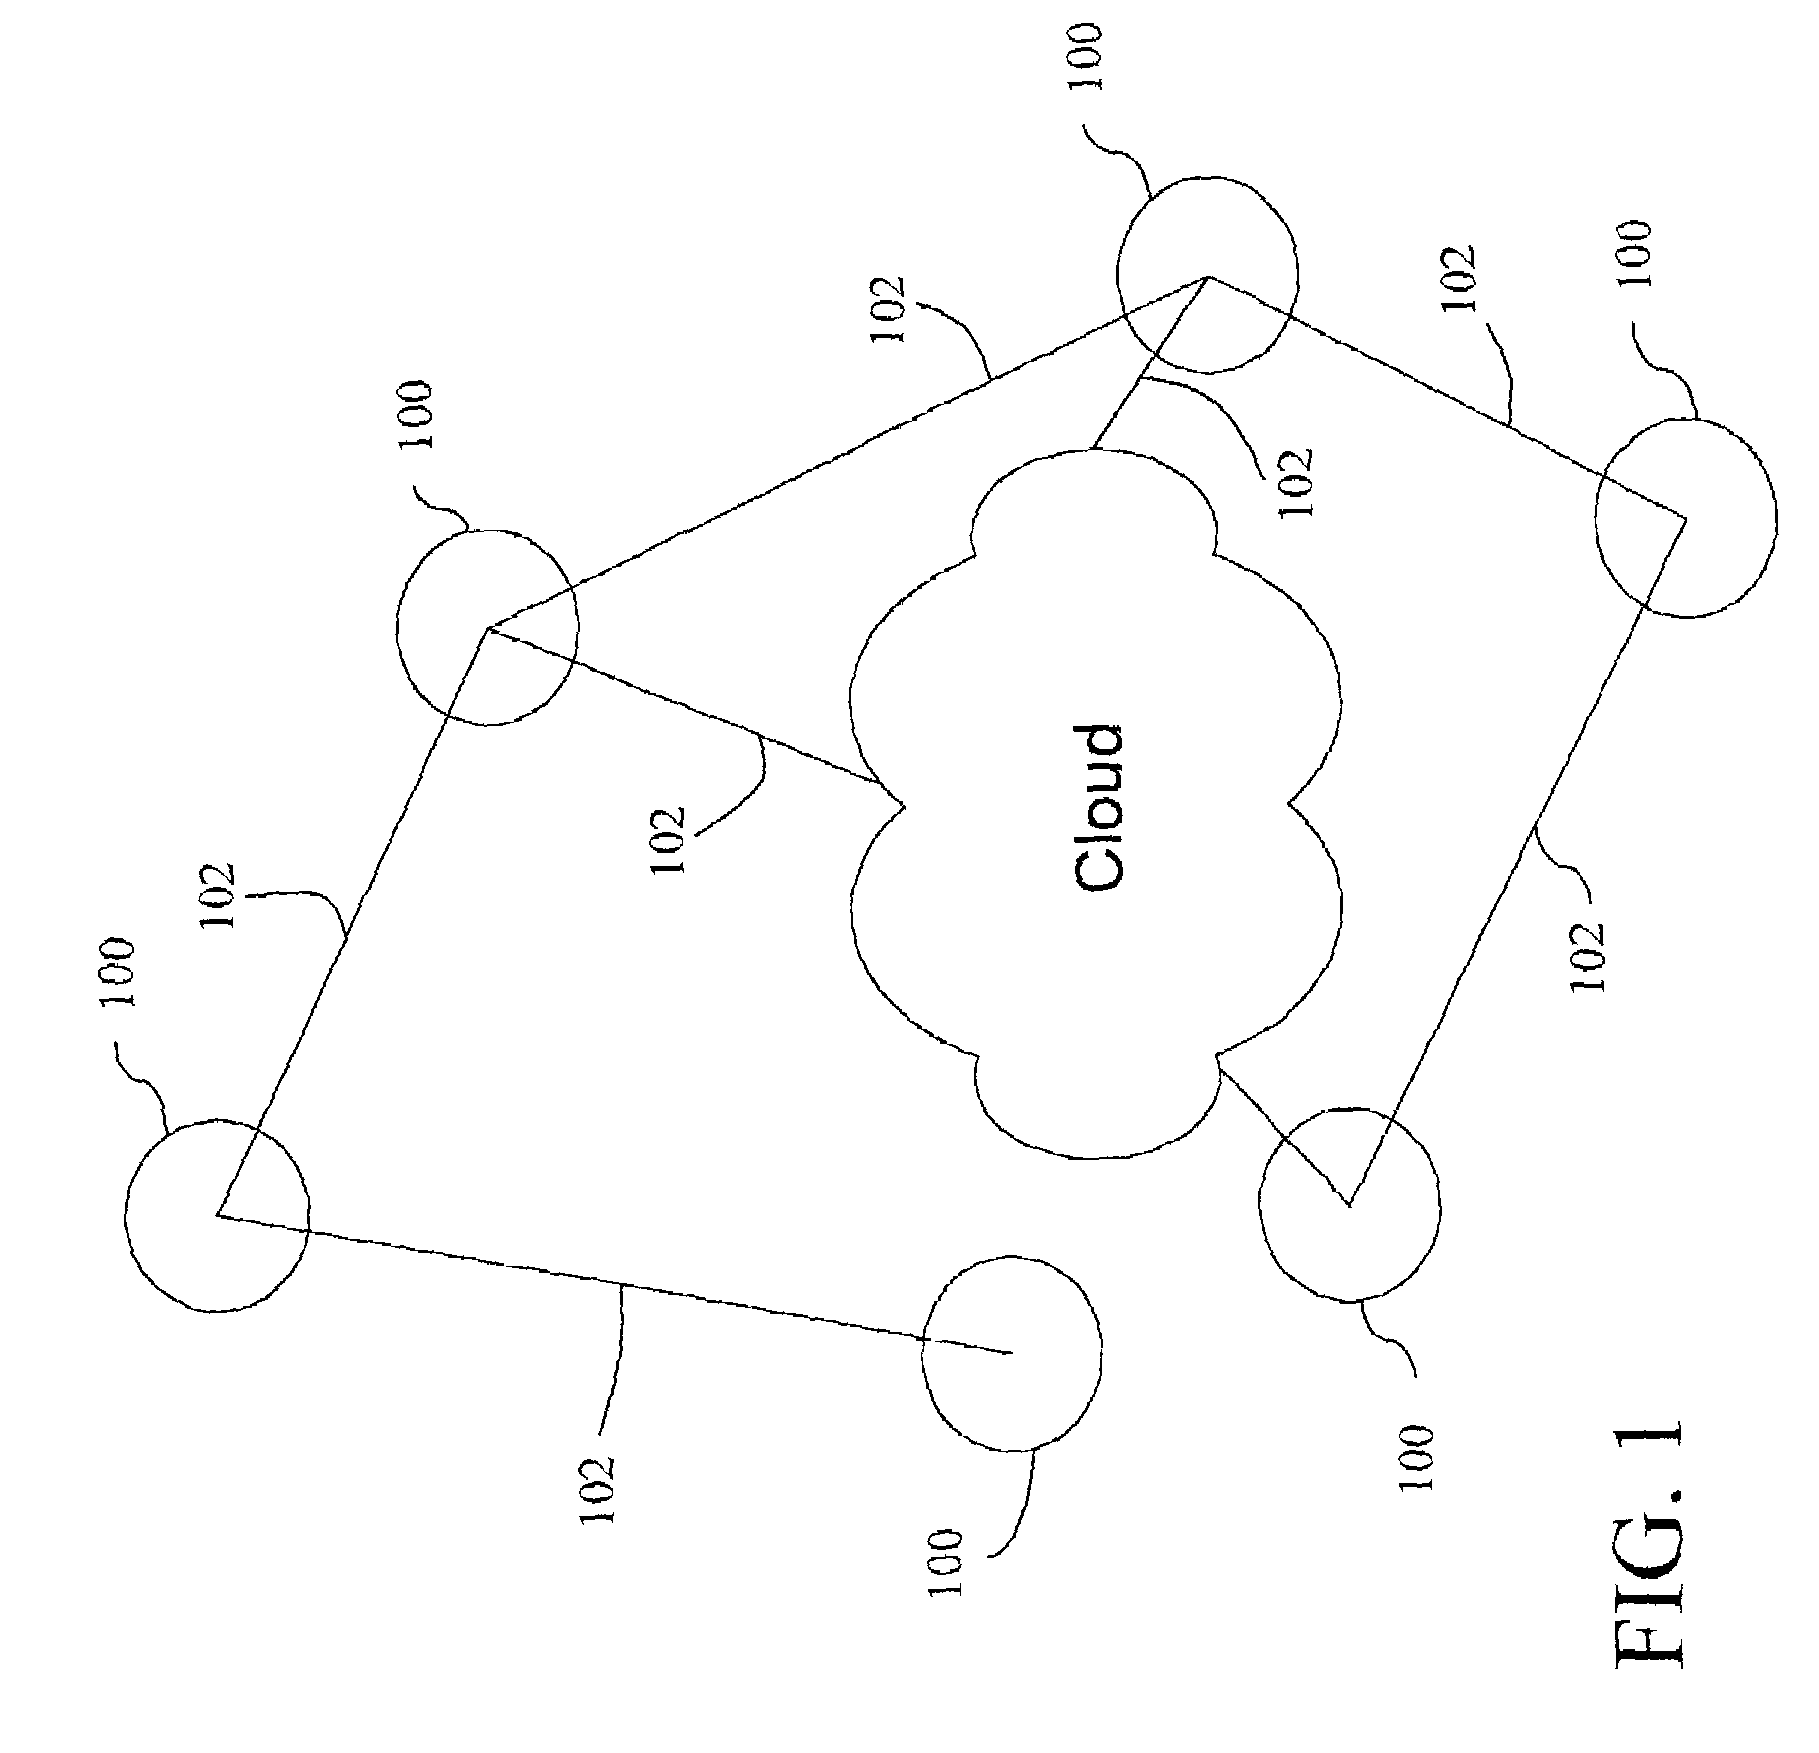 Time based packet scheduling and sorting system